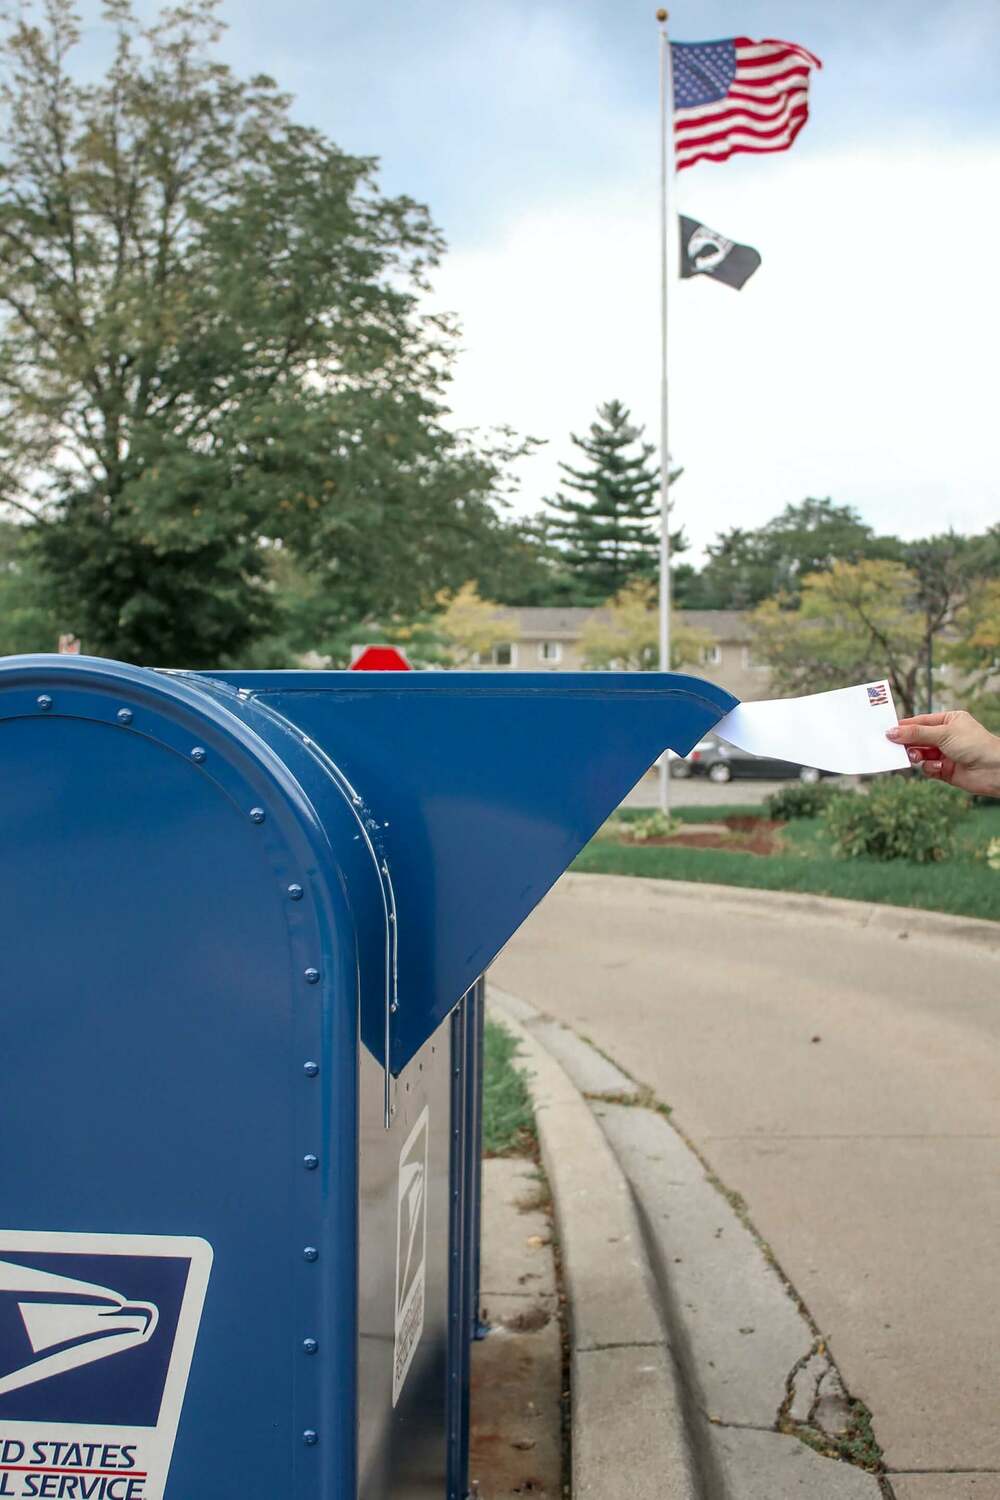 Sweep PO Box Service: Simplifying Your Mail Collection Process